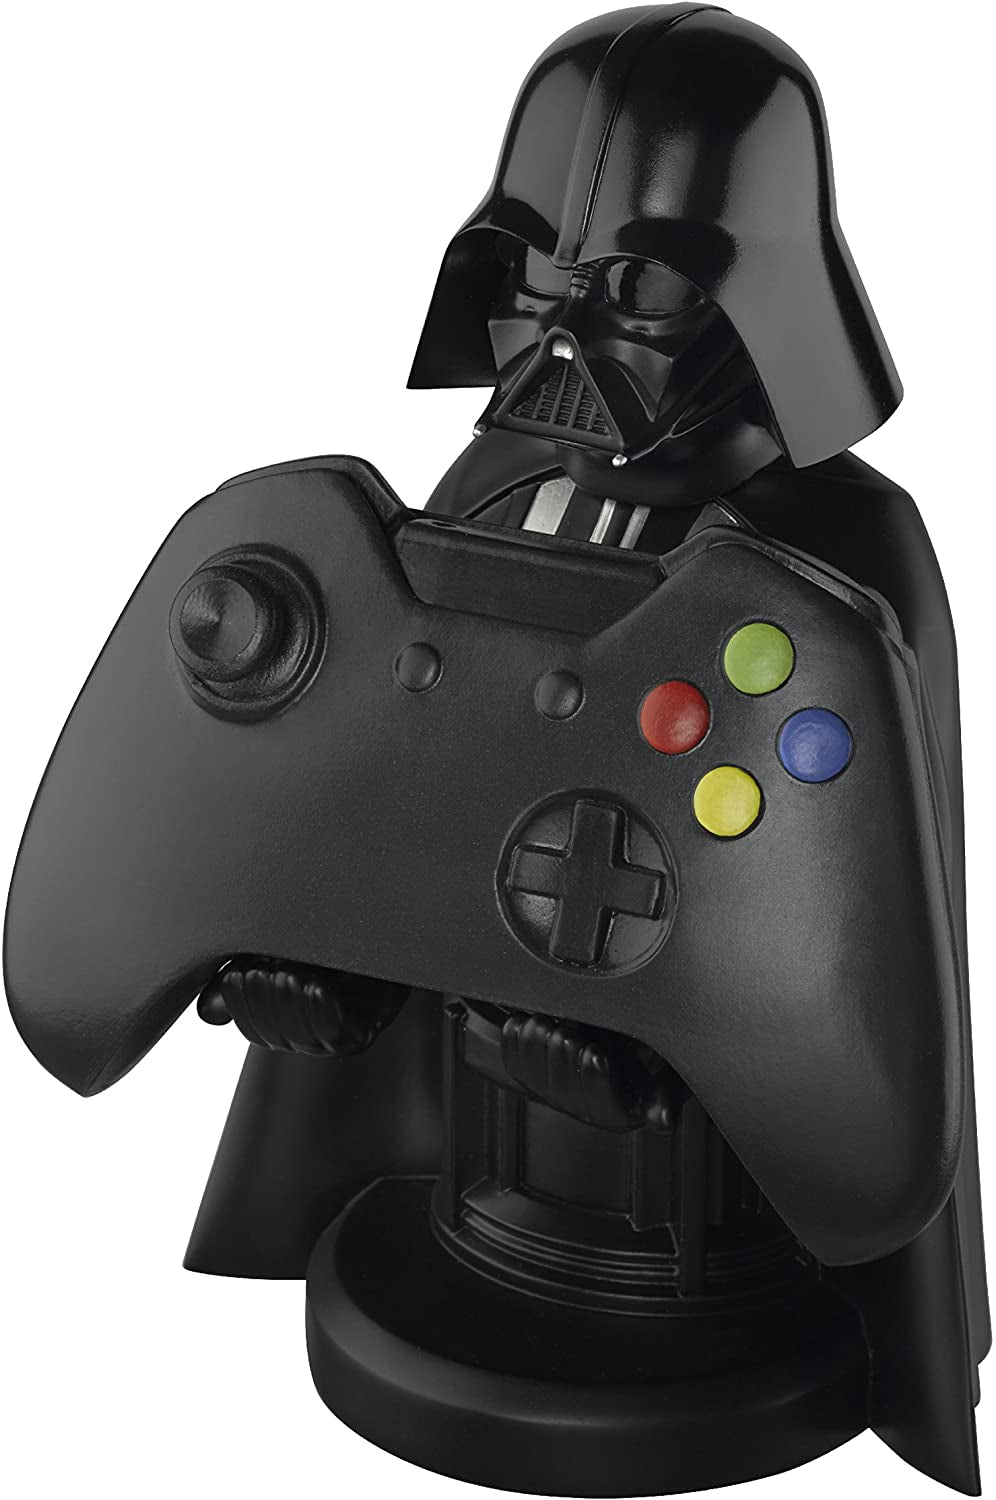 : Star Wars: Darth Vader - Original Mobile Phone & Gaming Controller Holder, Device Stand, Cable Guys, Licensed Figure (Multi-Colored)